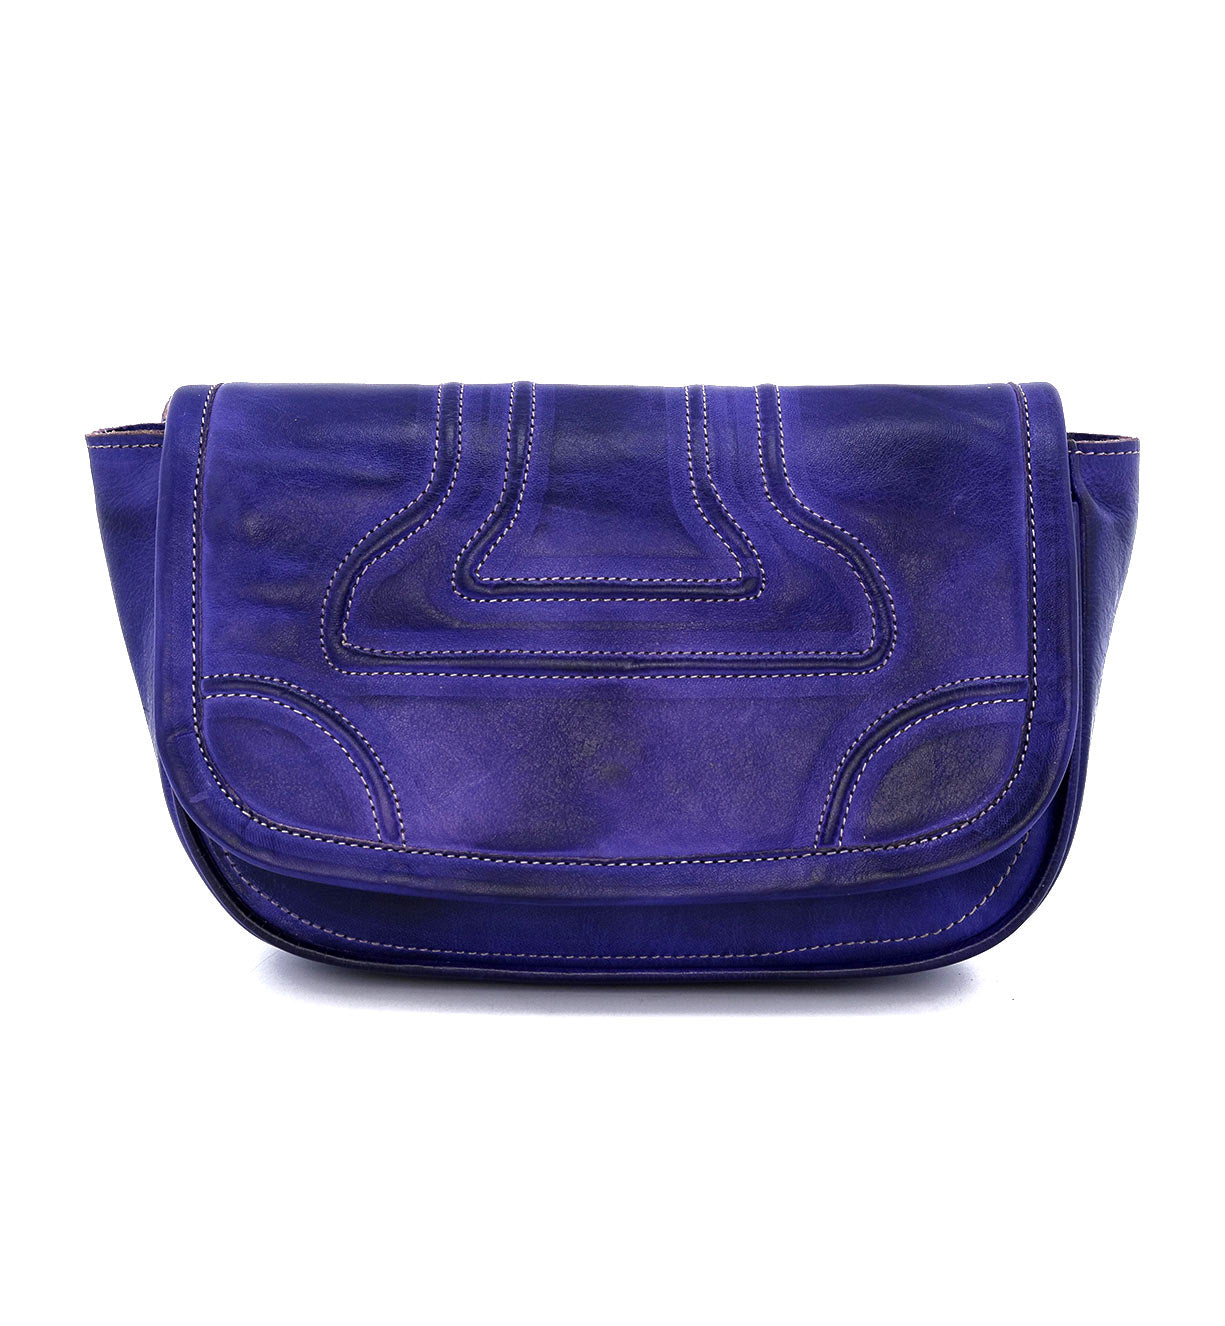 A purple leather Travers bag with a zipper by Bed Stu.